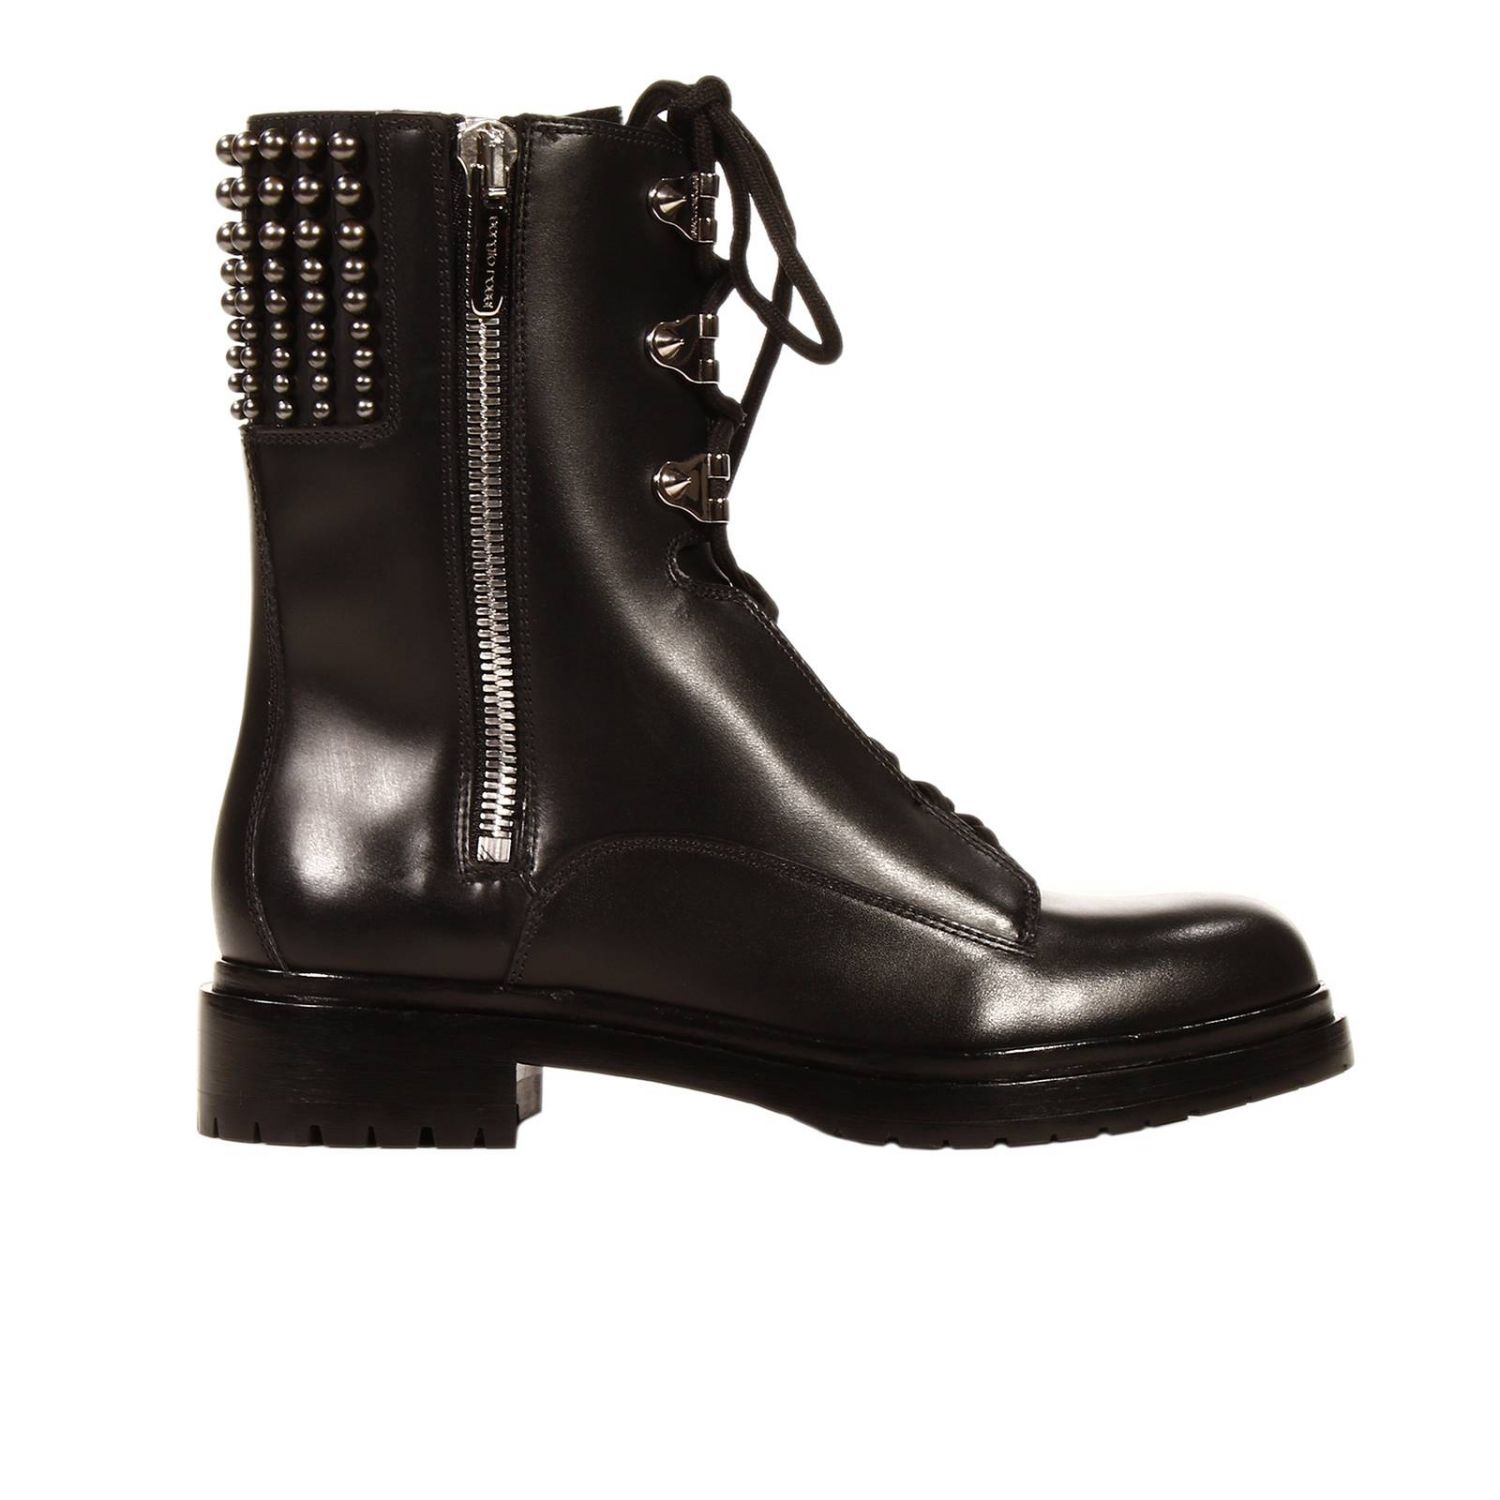 Sergio Rossi Outlet: BIKER LEATHER WITH DETAILS - Black | Boots Sergio ...